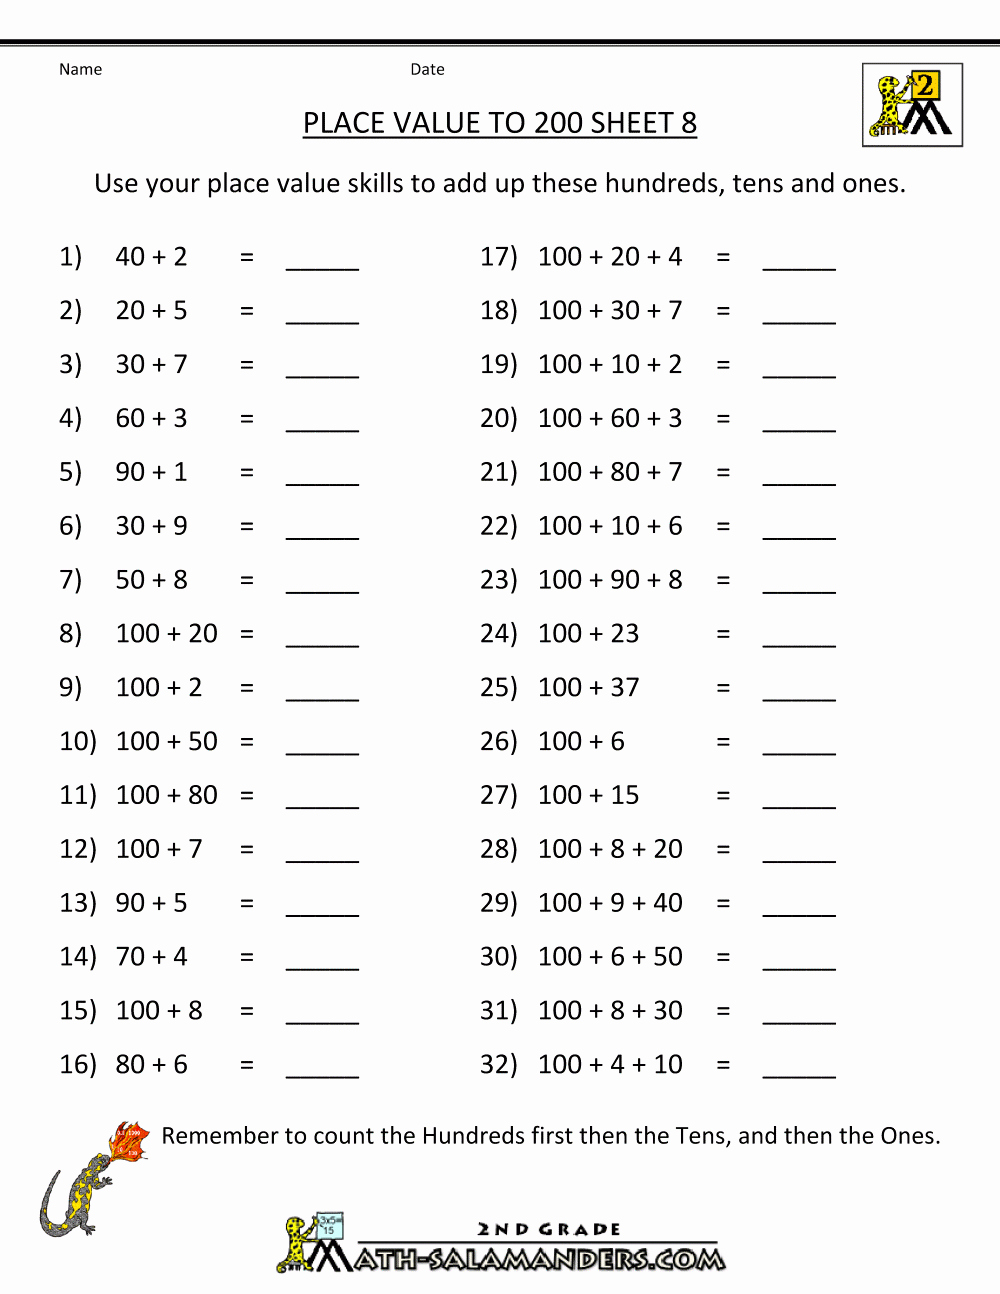 Sequencing Worksheets 4th Grade Fresh Number Sequence Worksheets 4th Grade